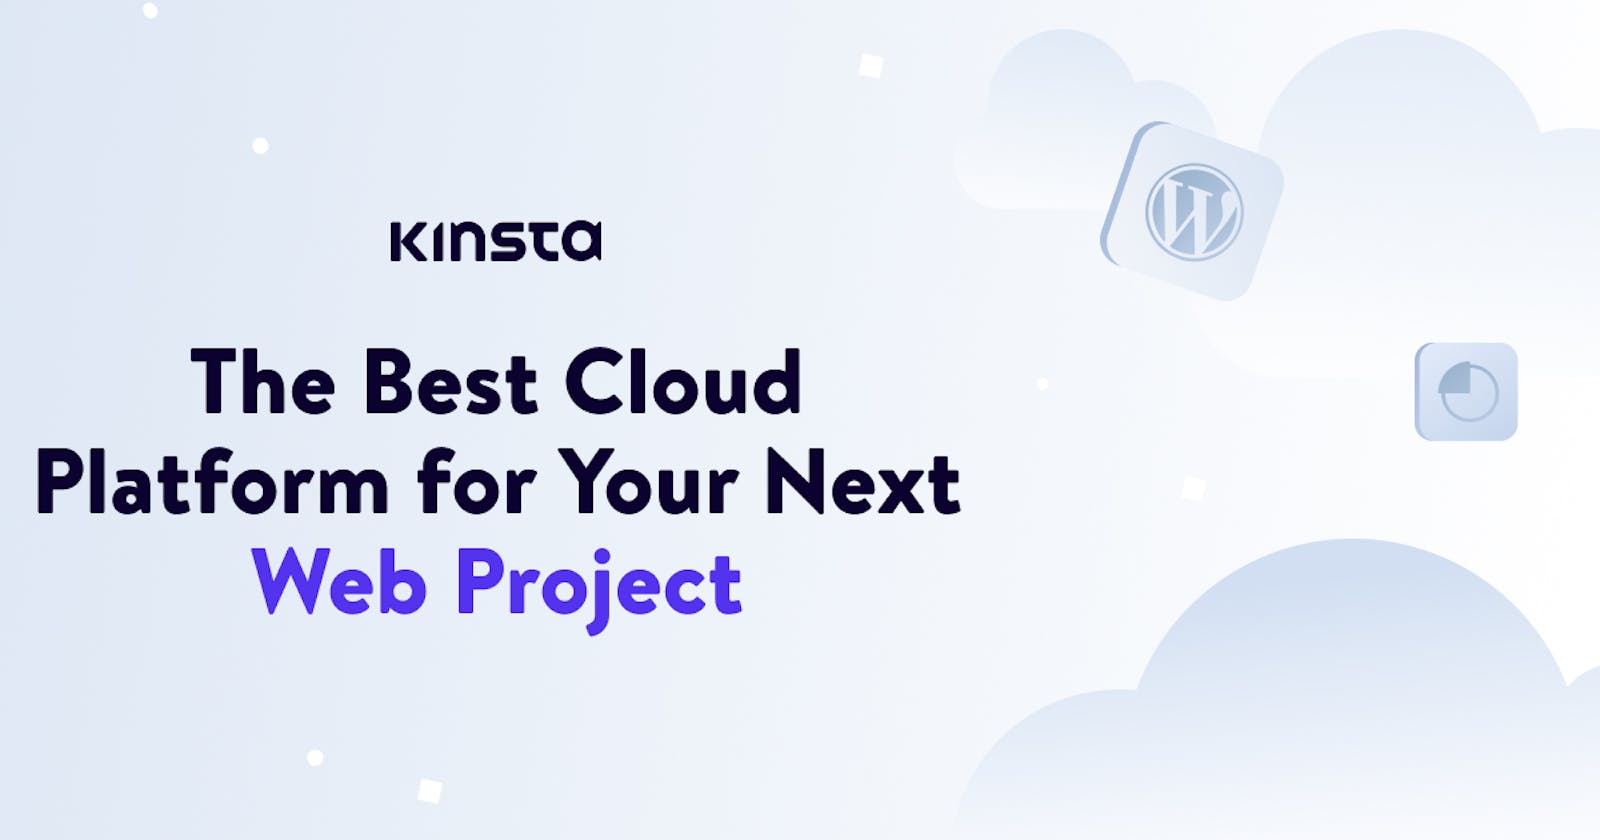 Application Hosting and Database Hosting Are Now Available at Kinsta With $20 Off Your First Month